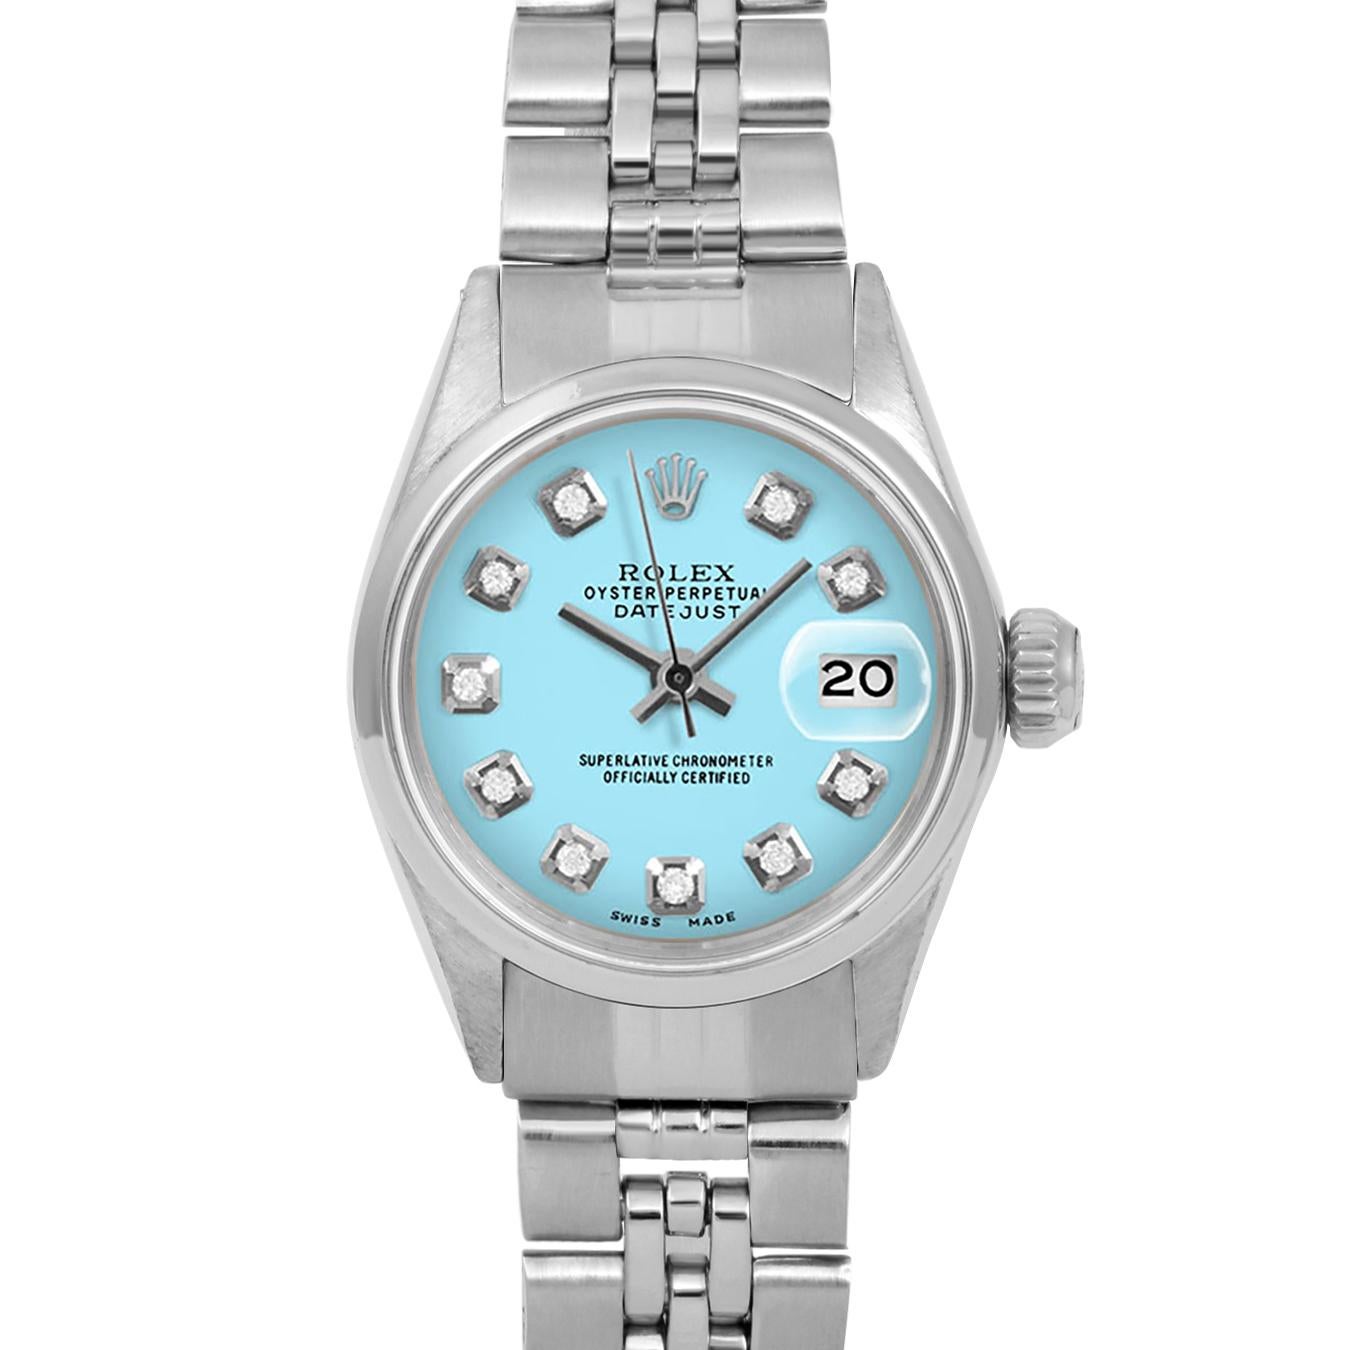 Brand : Rolex
Model : Datejust (Non-Quickset Model)
Gender : Ladies
Metals : Stainless Steel
Case Size : 24 mm

Dial : Custom Turquoise Diamond Dial (This dial is not original Rolex And has been added aftermarket yet is a beautiful Custom